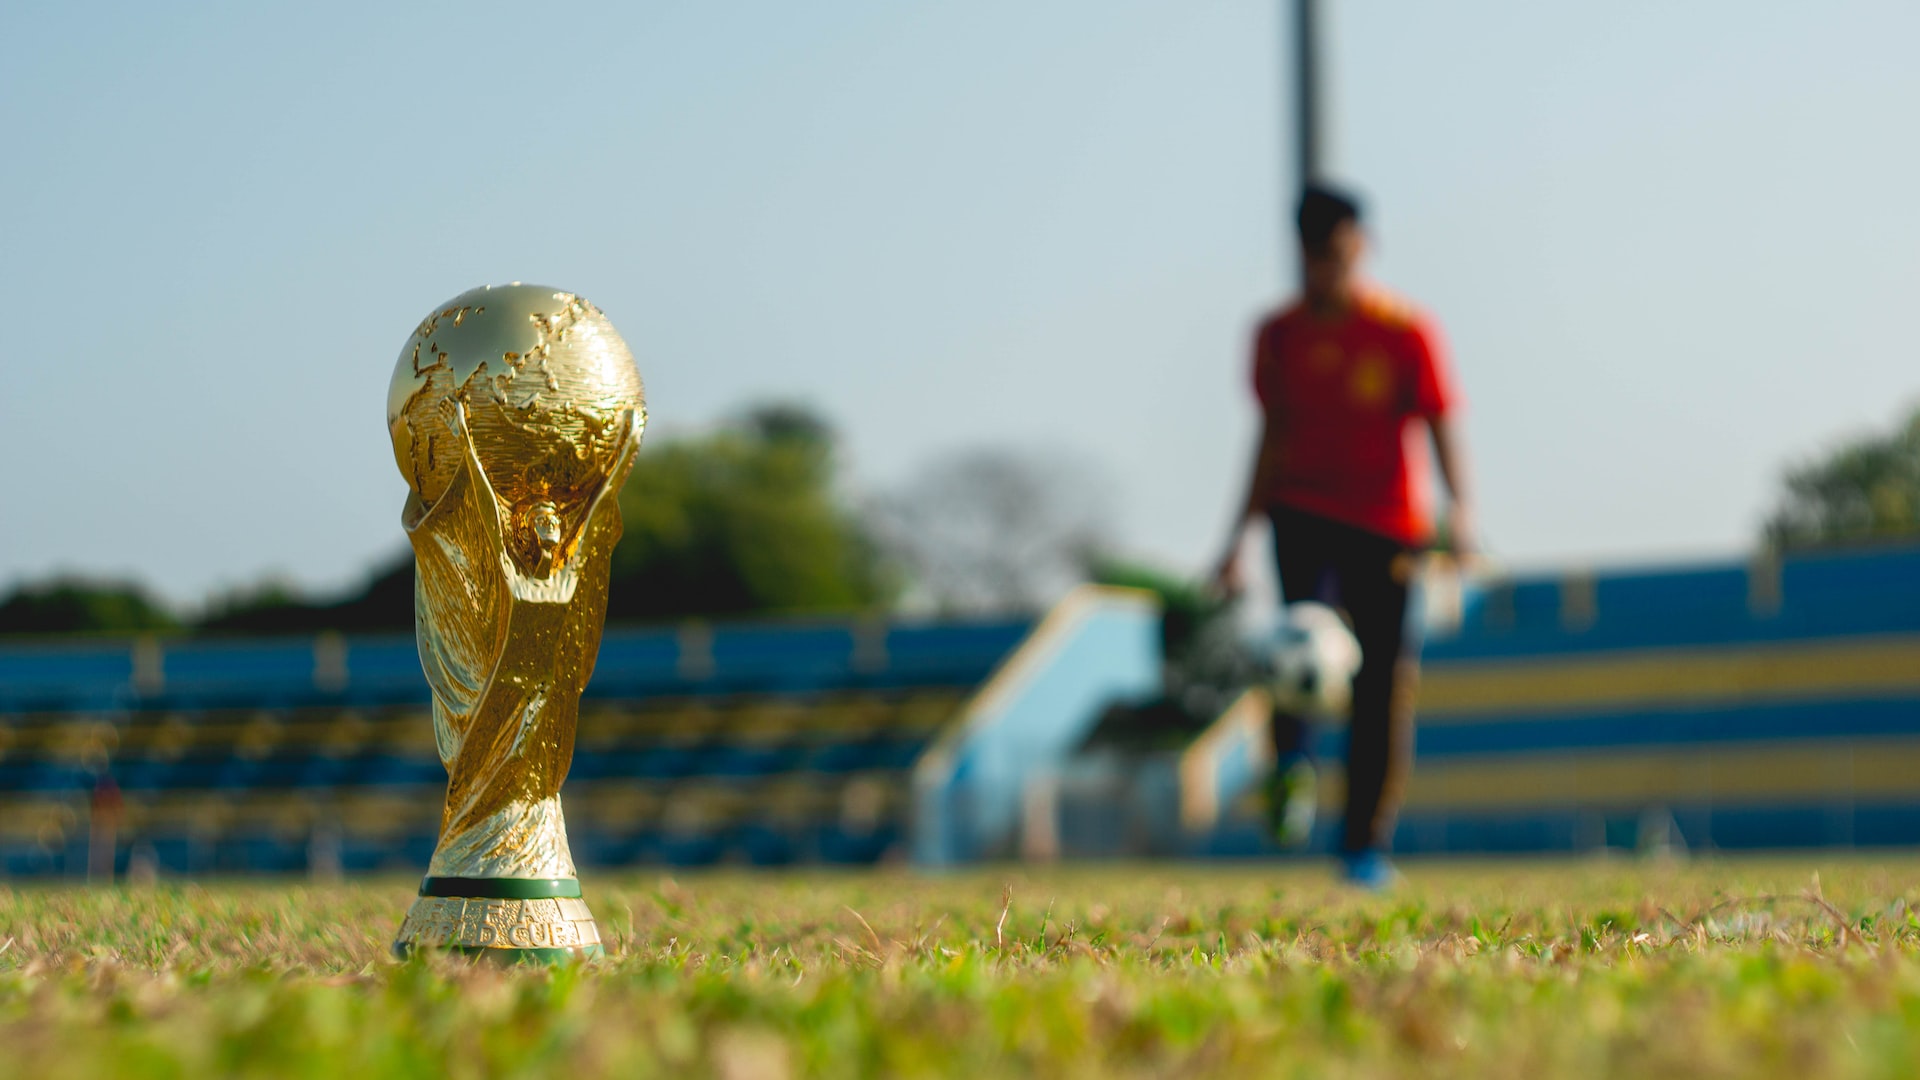 How to benefit from the 2022 FIFA World Cup in Qatar using crypto